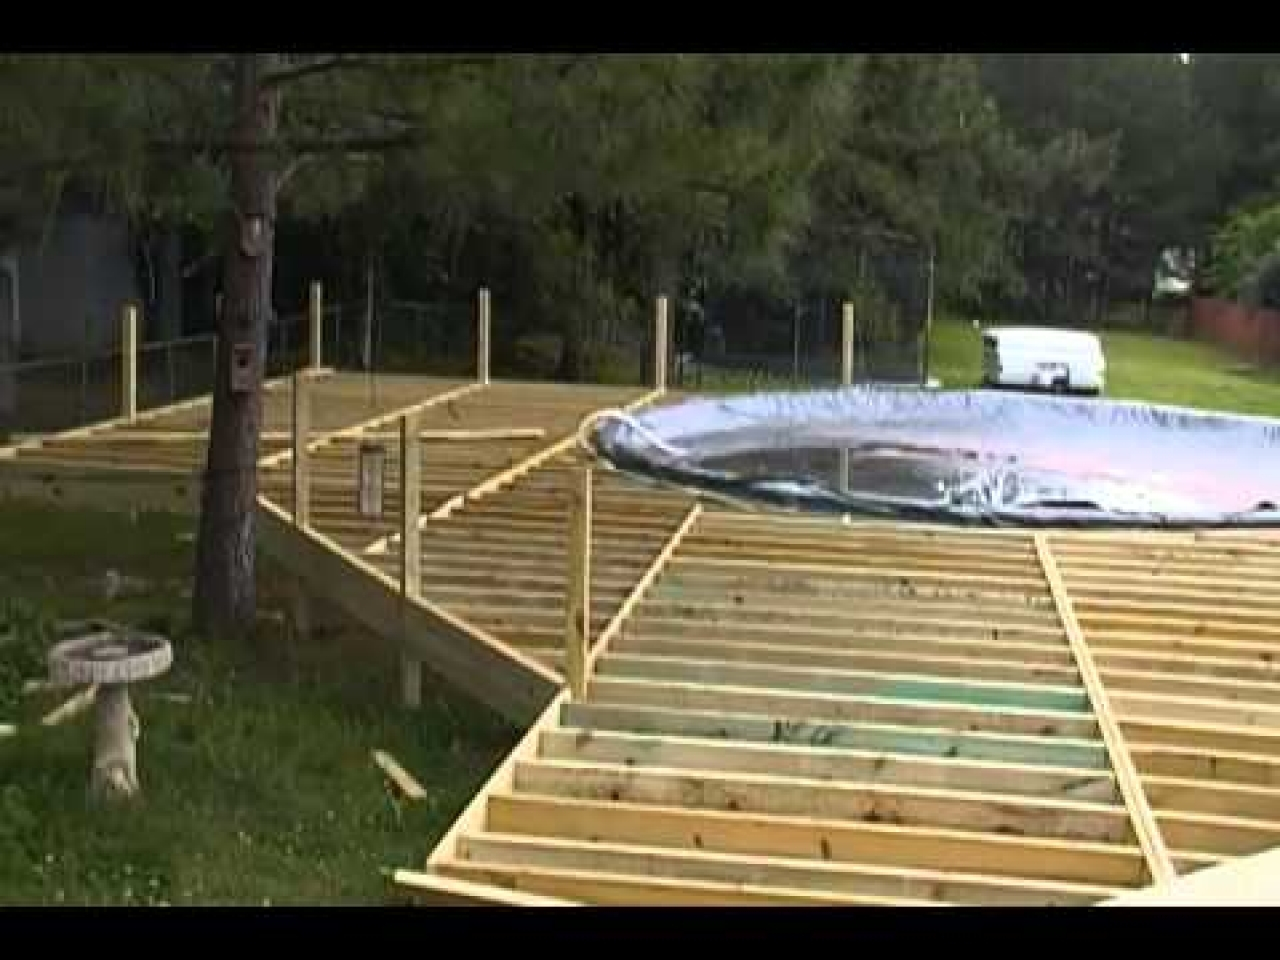 Wood Decks For Above Ground Pools Wood Decks For Above Ground in dimensions 1280 X 960